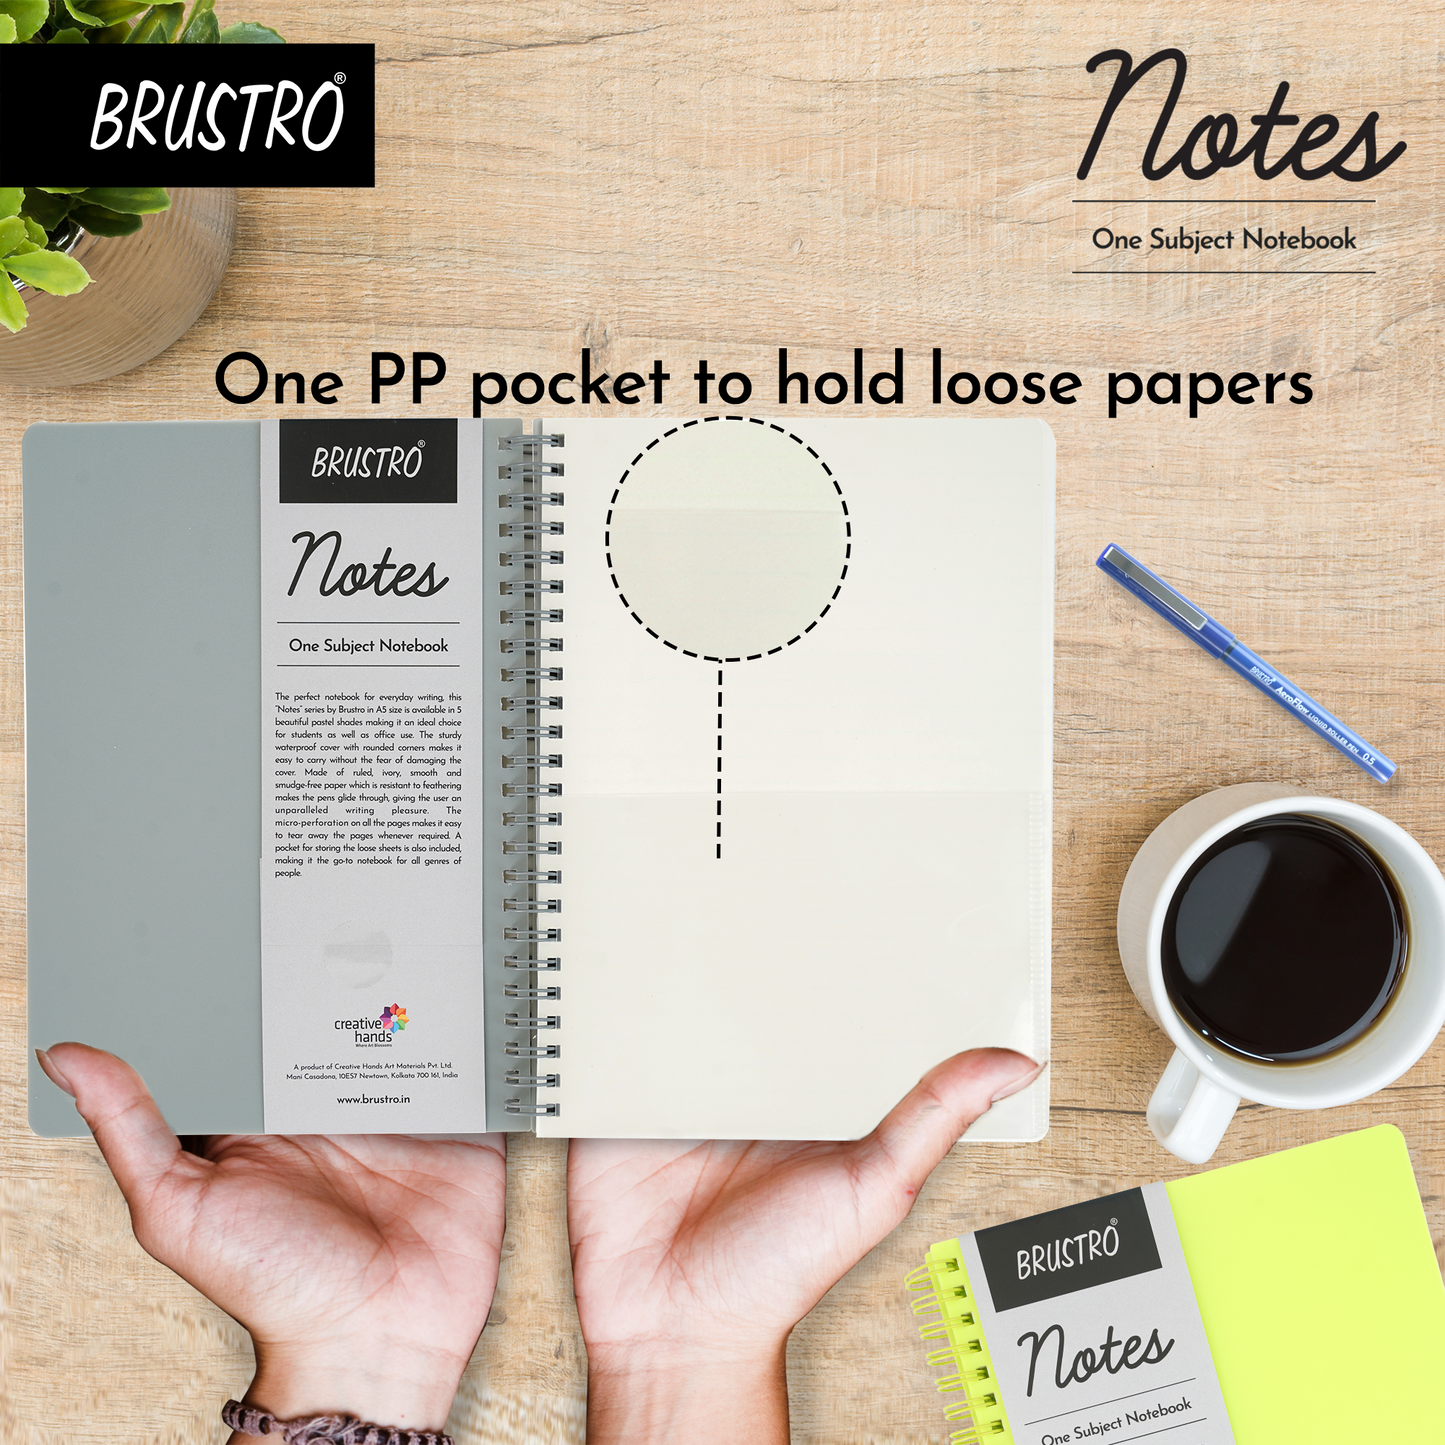 BRUSTRO Notes A5 Size, 1 Subject Ruled Notebook, 80 sheets / 160 pages, 70 gsm Ivory paper, Slate Cover